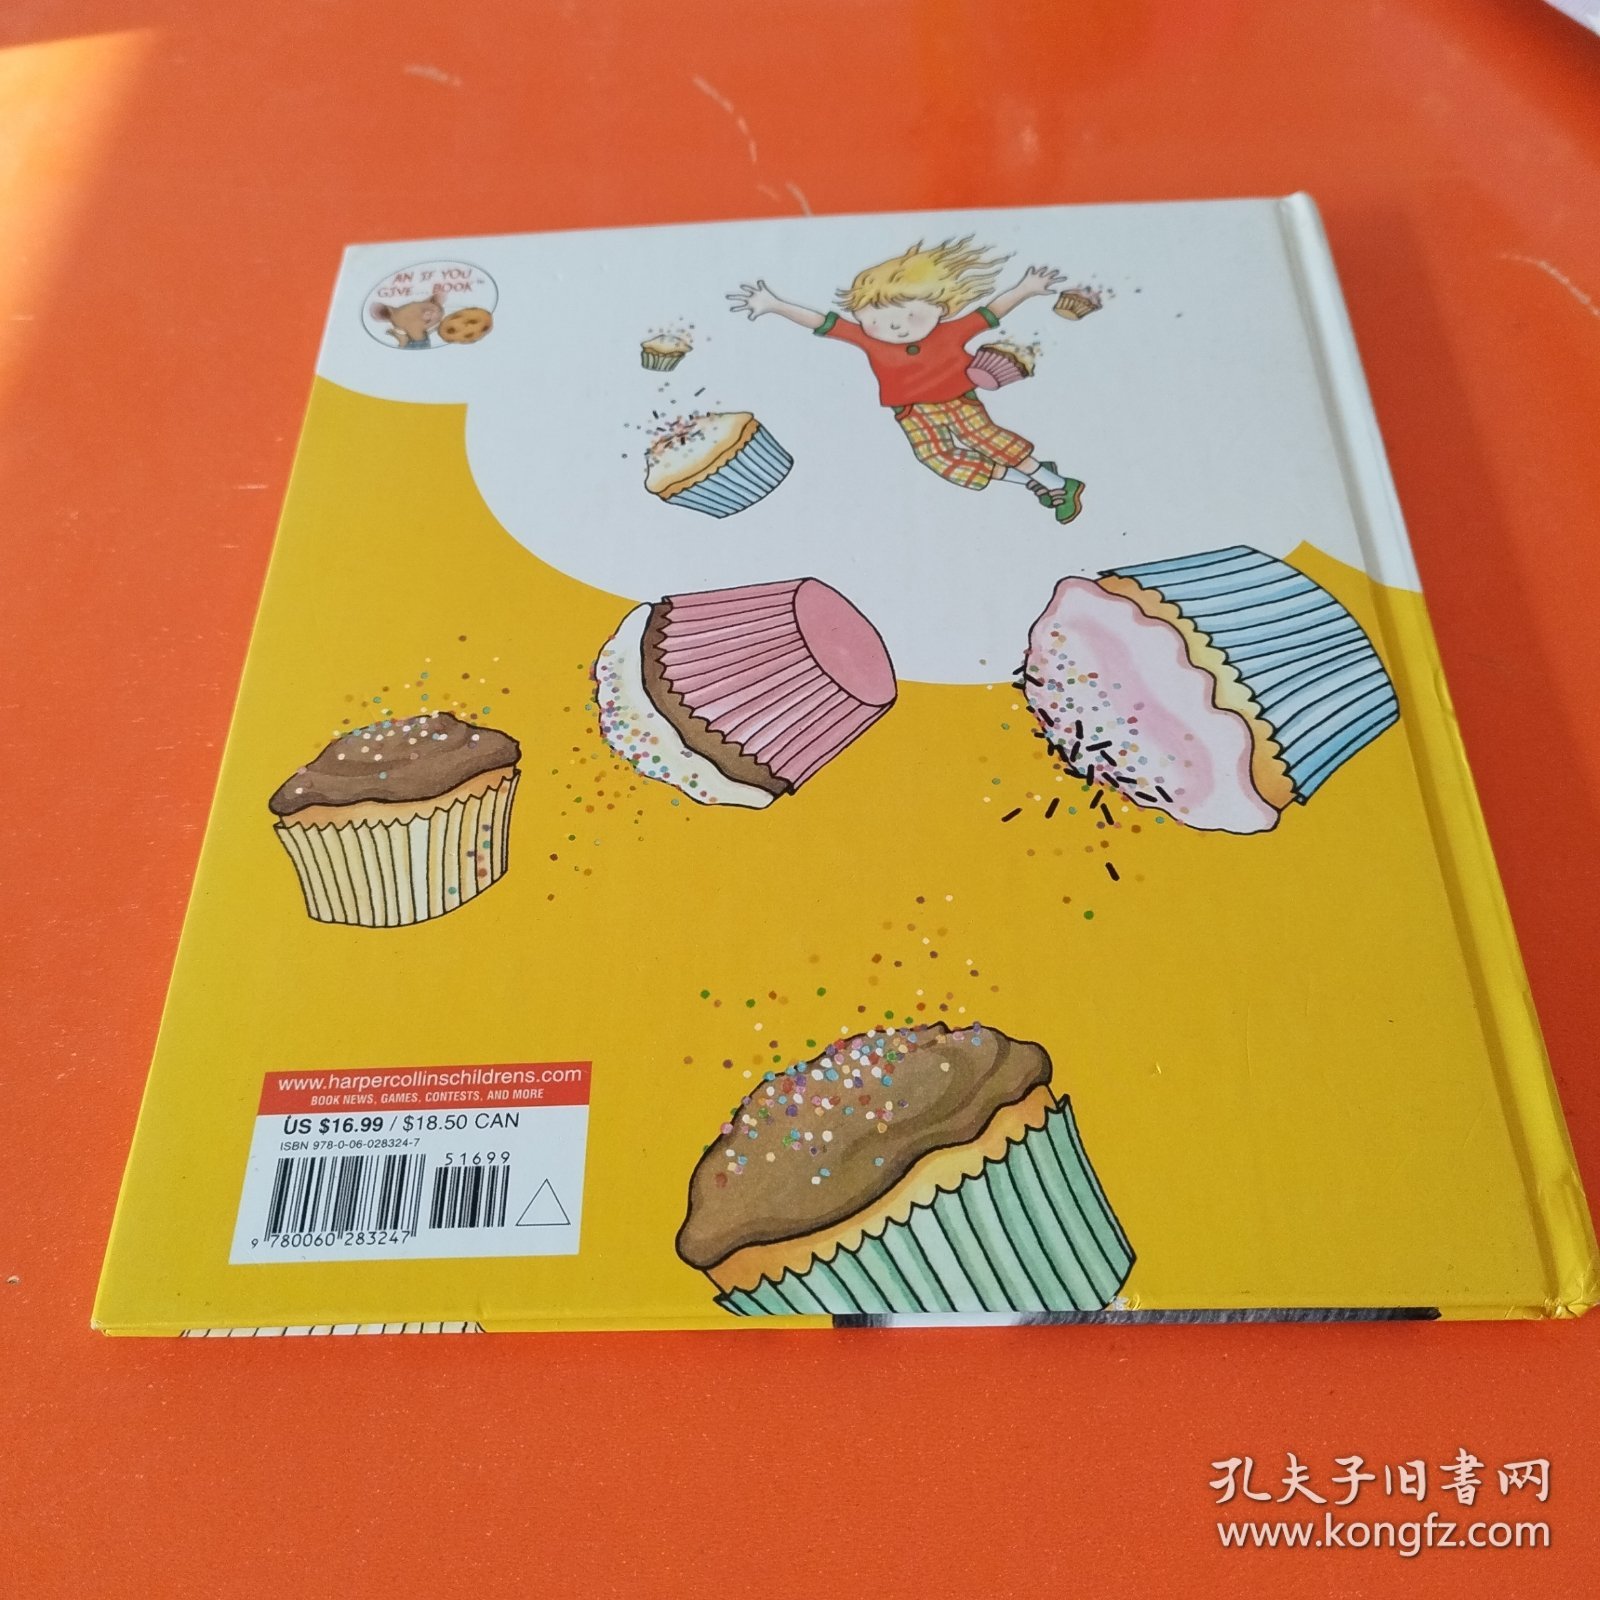 If You Give…系列：If You Give a Cat a Cupcake 要是你给猫吃杯子蛋糕(精装)